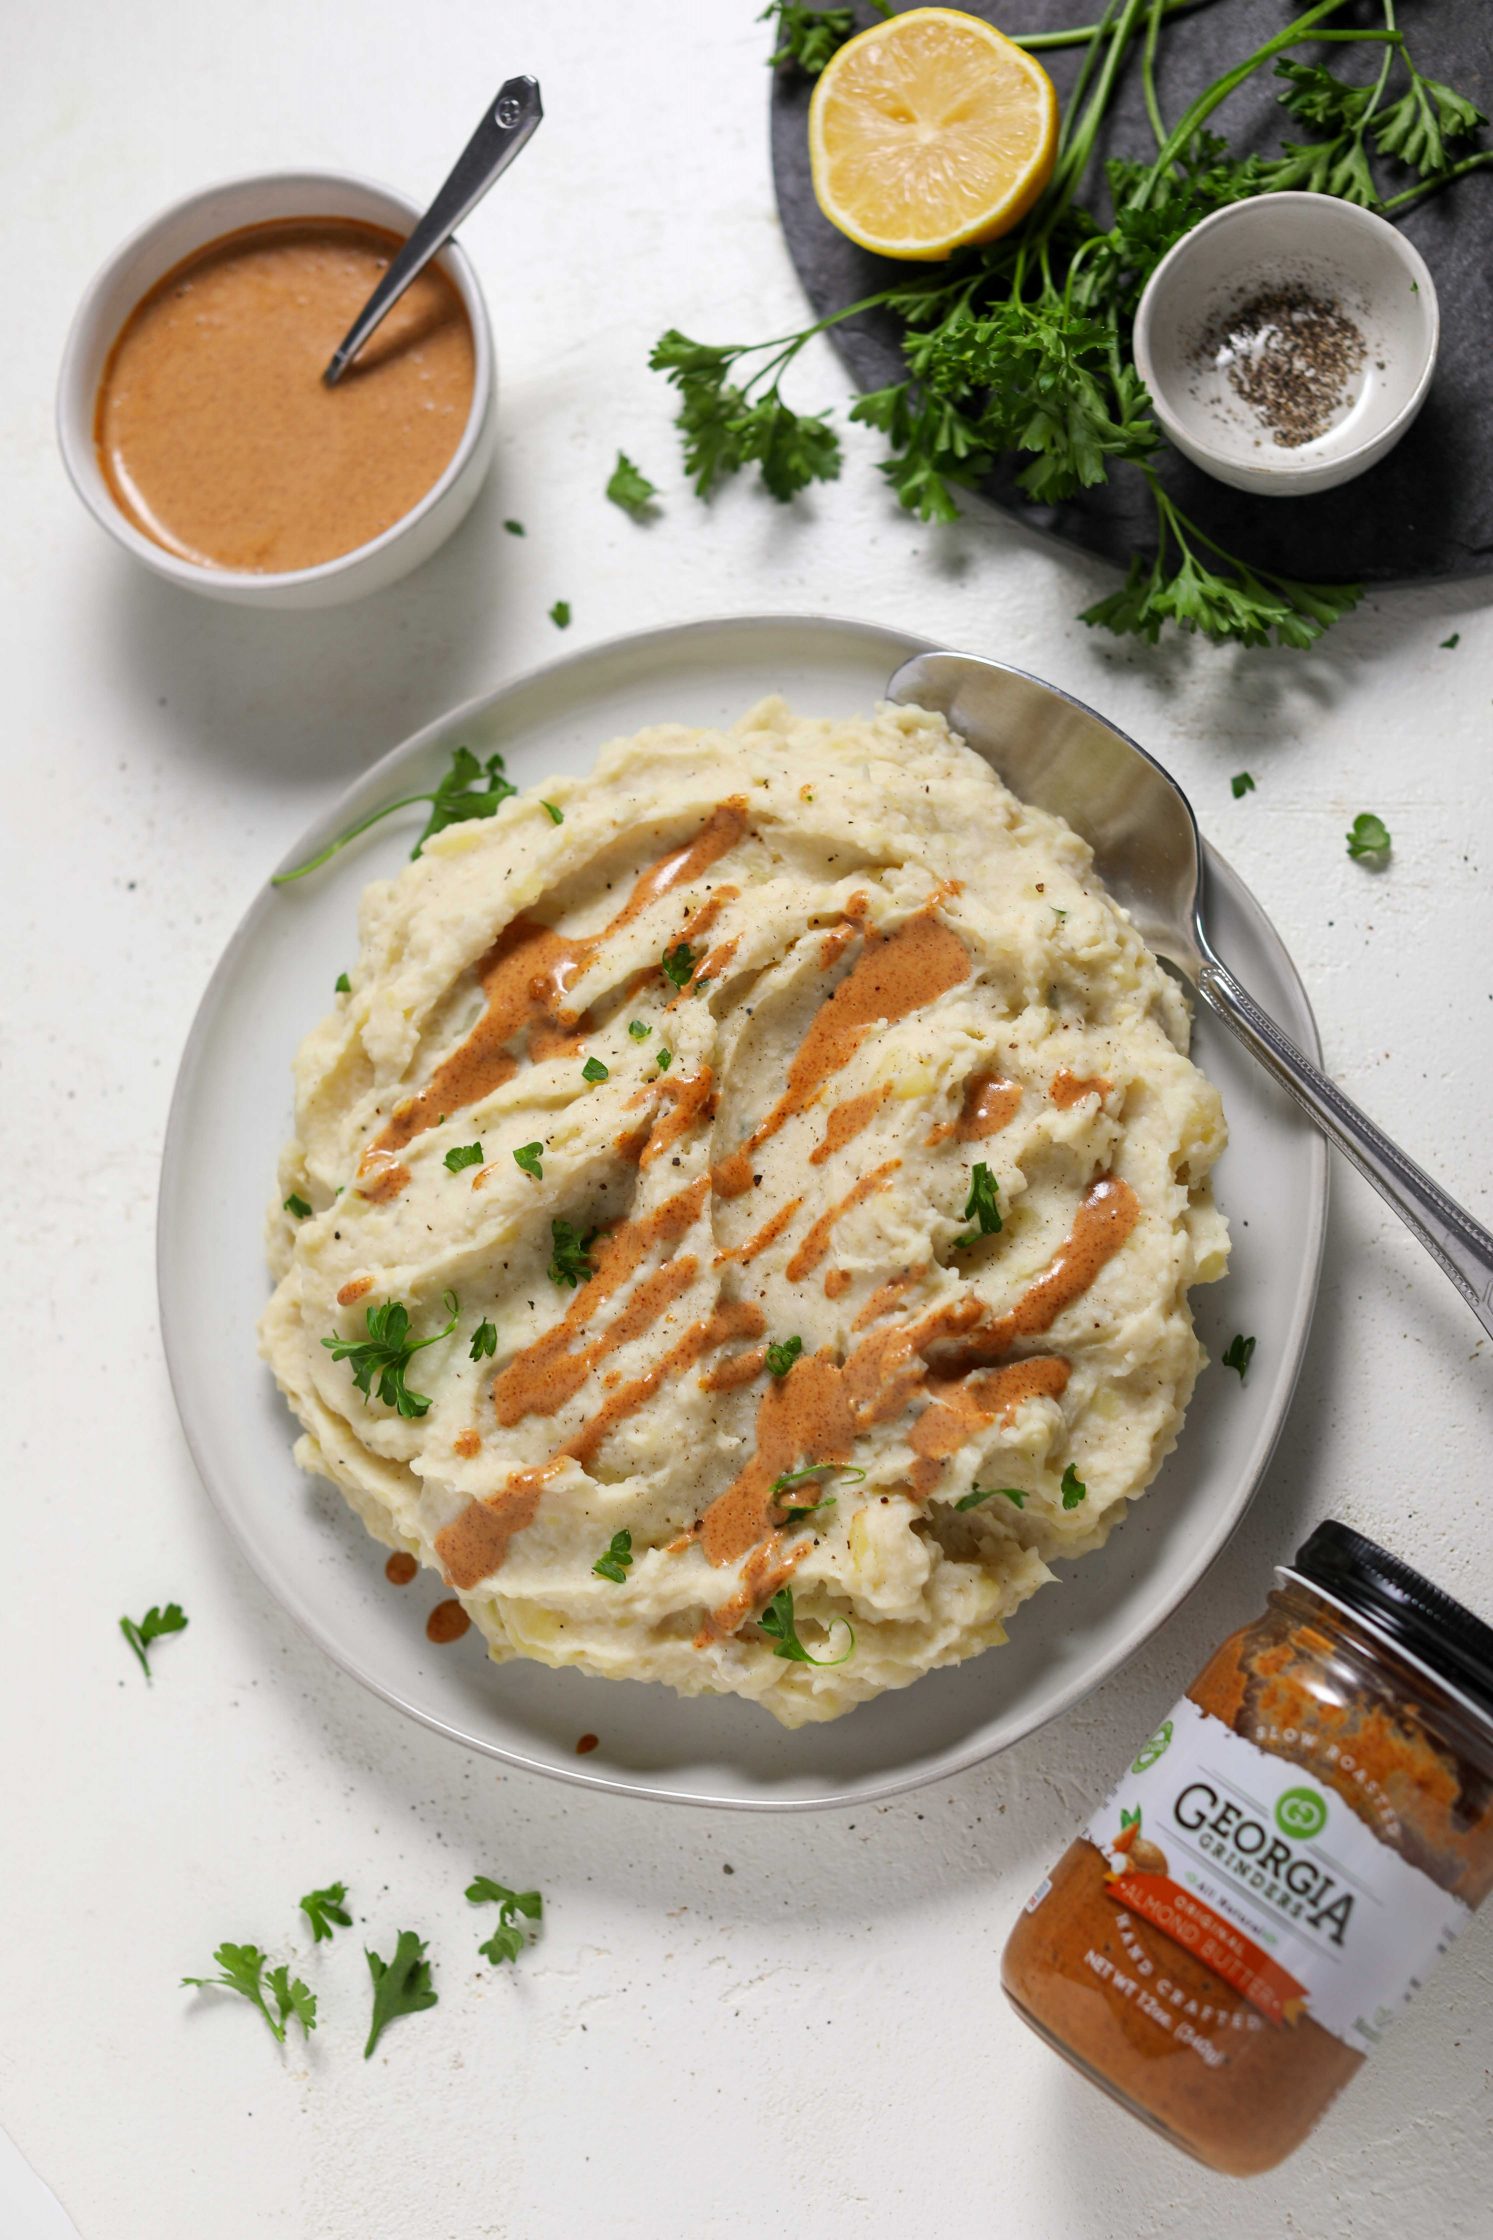 Cauliflower Mashed Potatoes served with Almond Butter “Gravy” by Flora & Vino